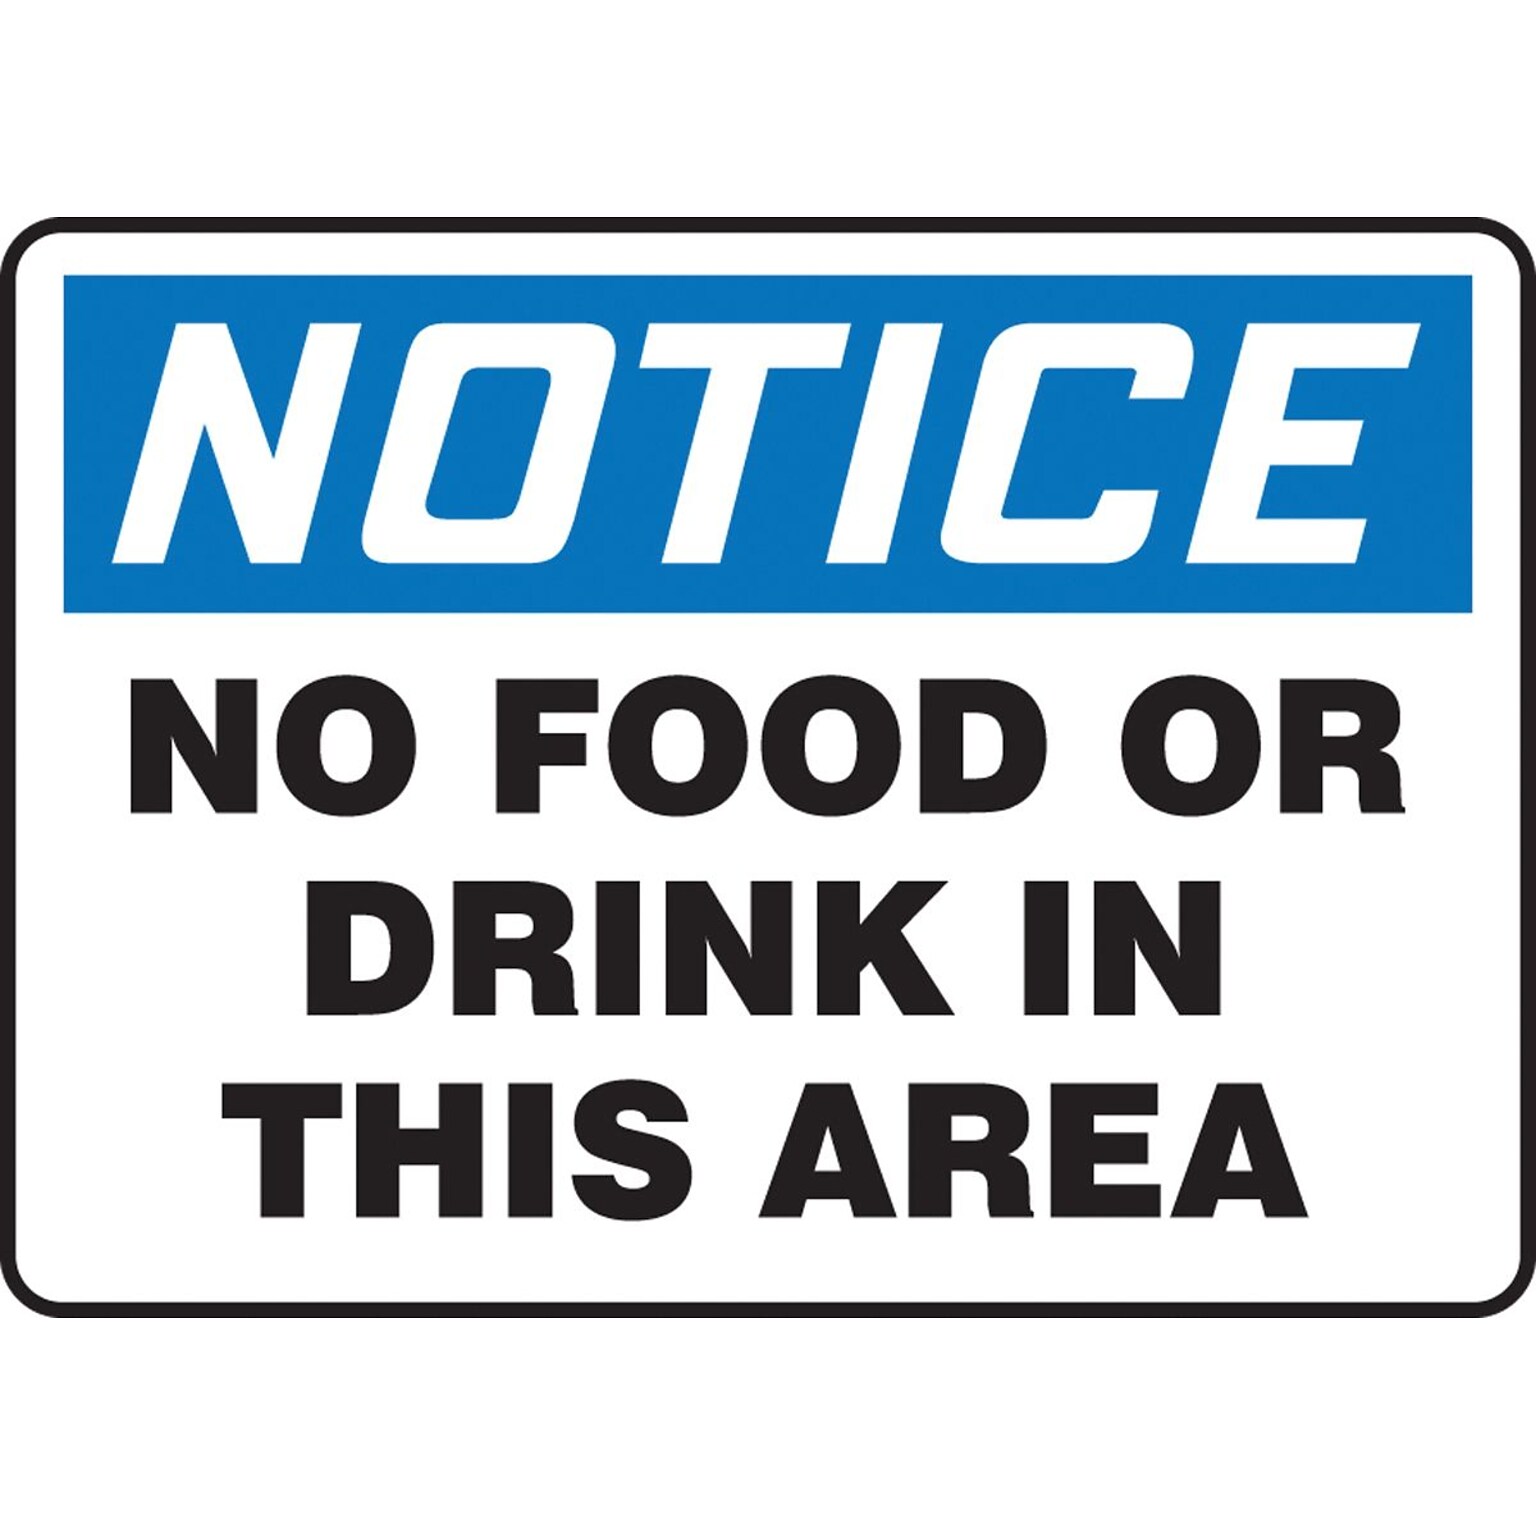 Accuform 7 x 10 Adhesive Vinyl Housekeeping Sign NOTICE NO FOOD.., Blue/Black On White (MHSK801VS)